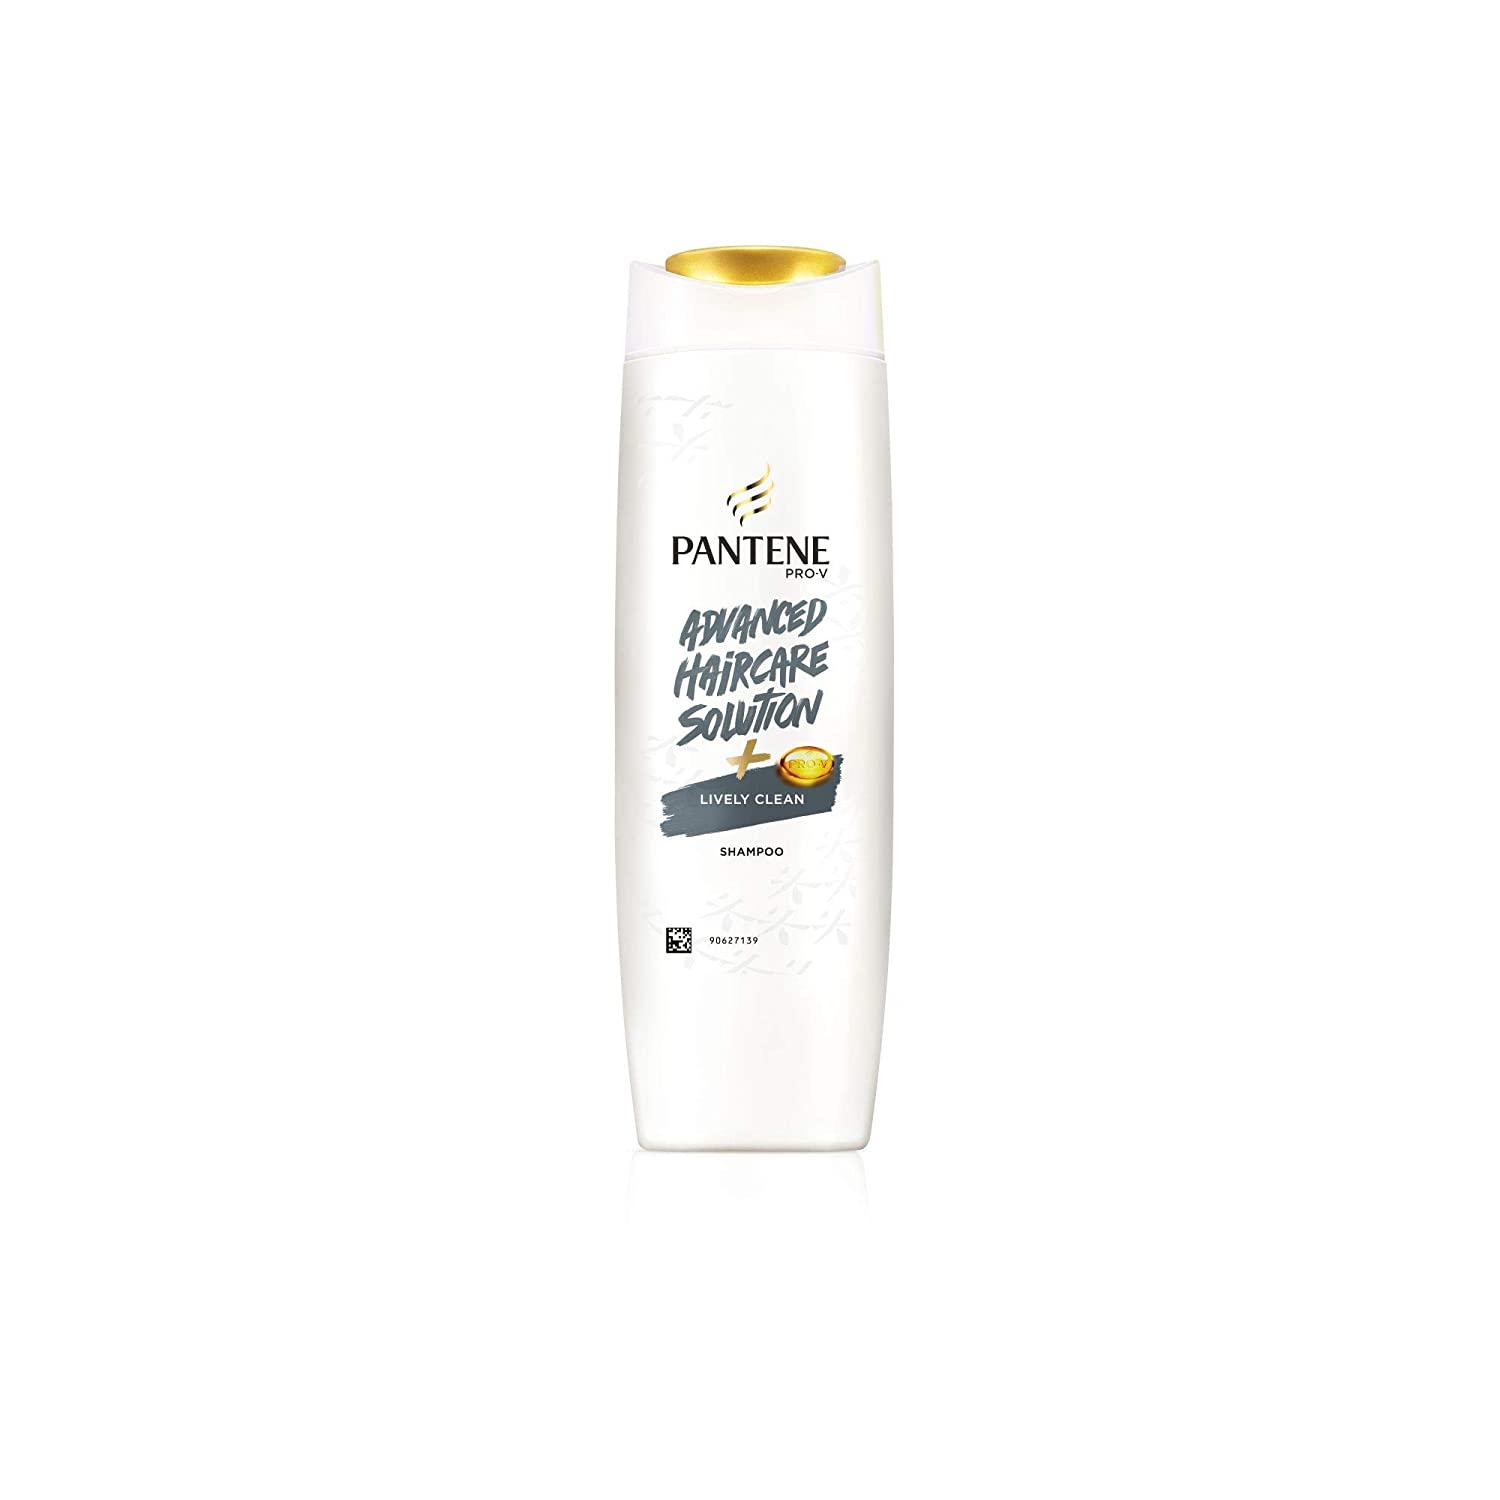 Pantene Advanced HairCare Solution Lively Clean Shampoo